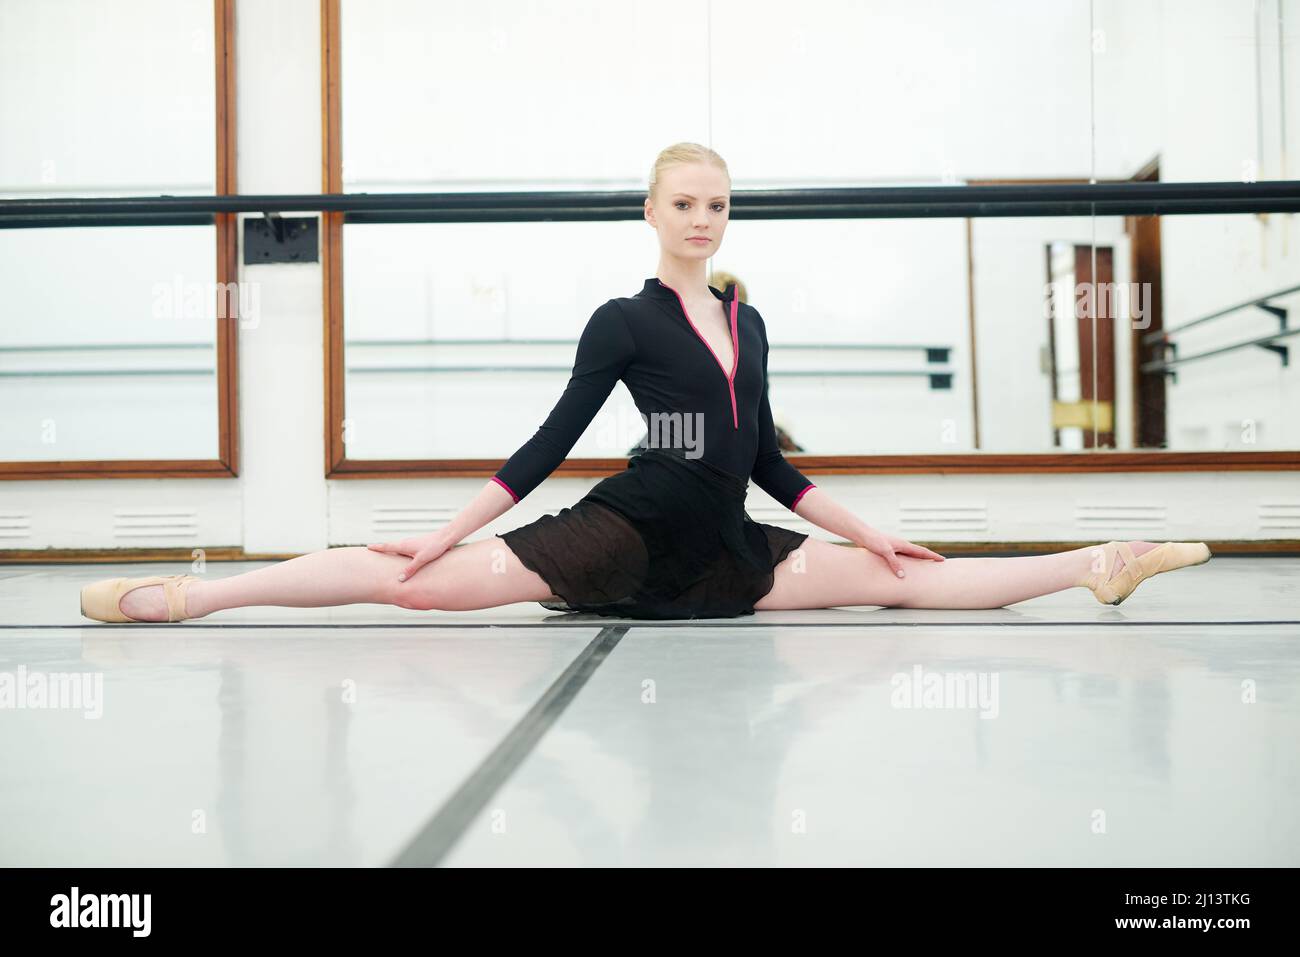 My heart beats to the rhythm of ballet. Portrait of a young woman practising ballet. Stock Photo